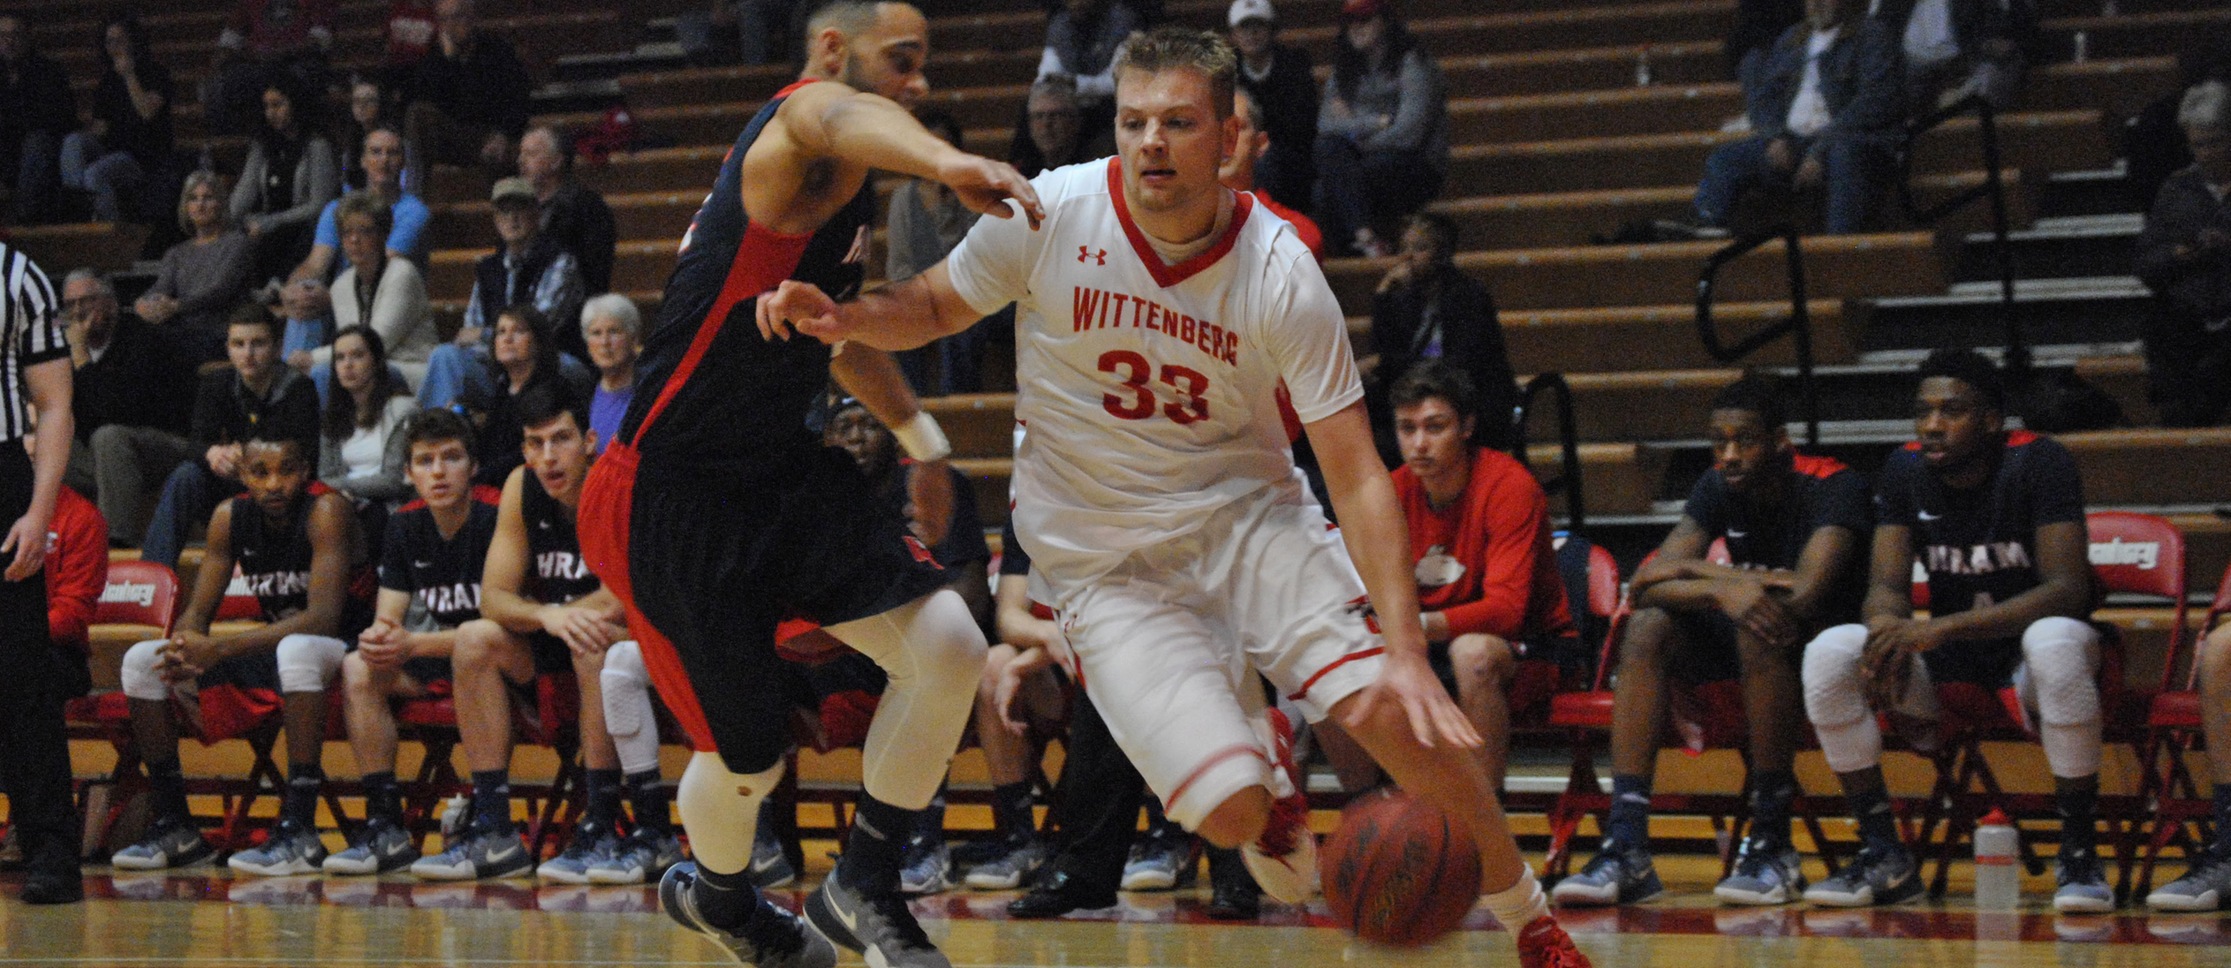 Tigers Roll Past Terriers 90-44 in NCAC Quarterfinal Victory